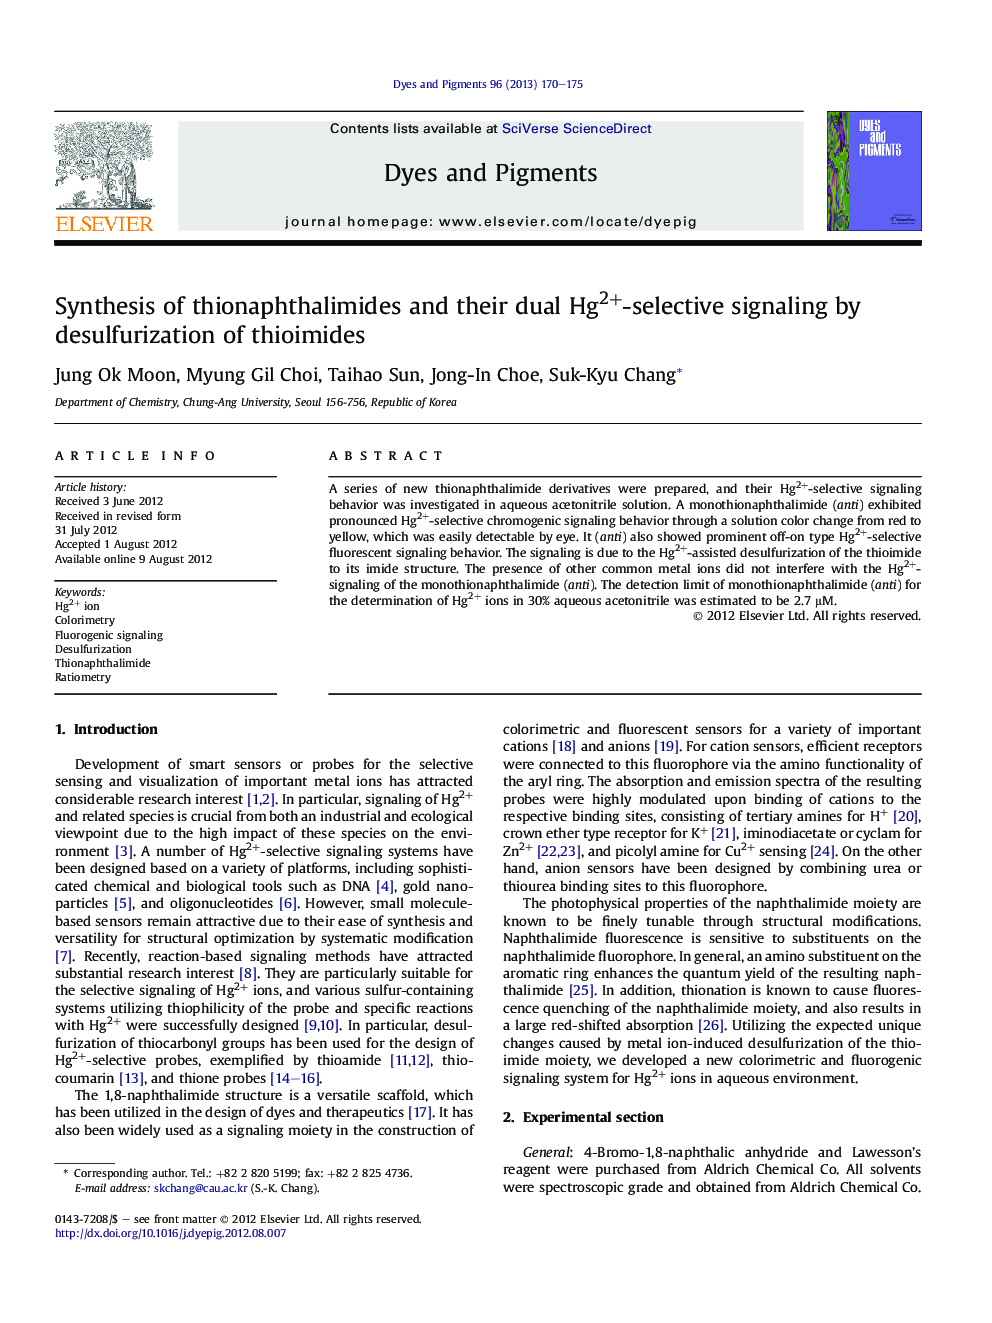 Synthesis of thionaphthalimides and their dual Hg2+-selective signaling by desulfurization of thioimides